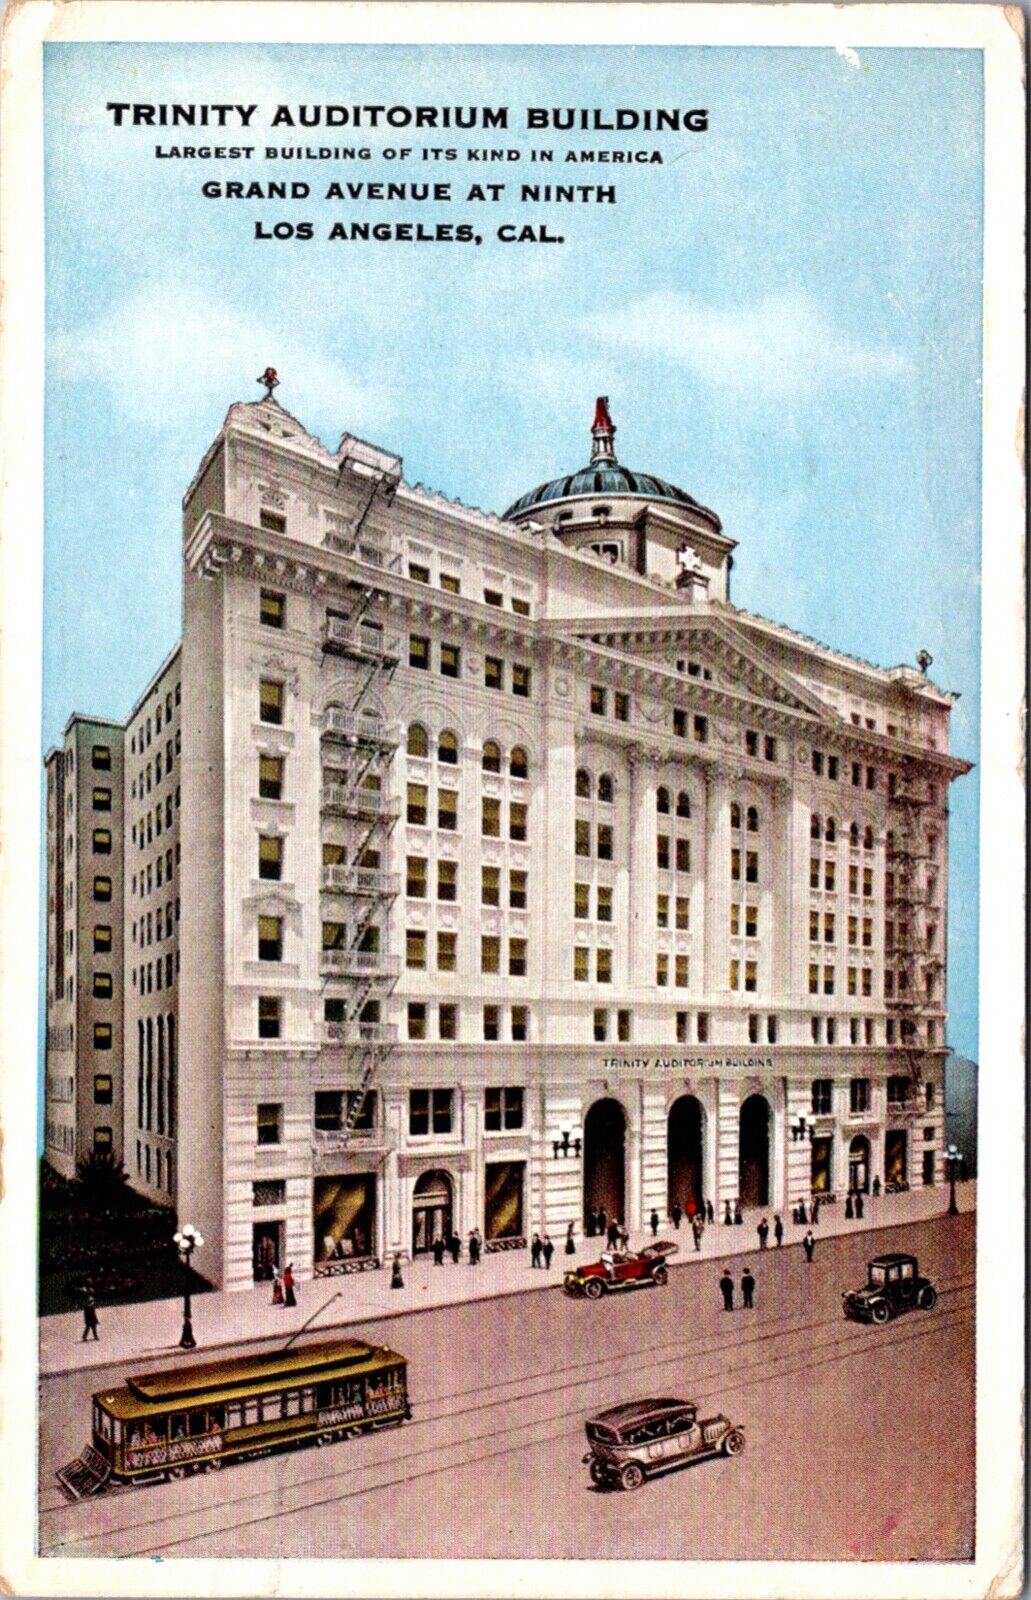 PC Trinity Auditorium Building Grand Ave at Ninth in Los Angeles, California